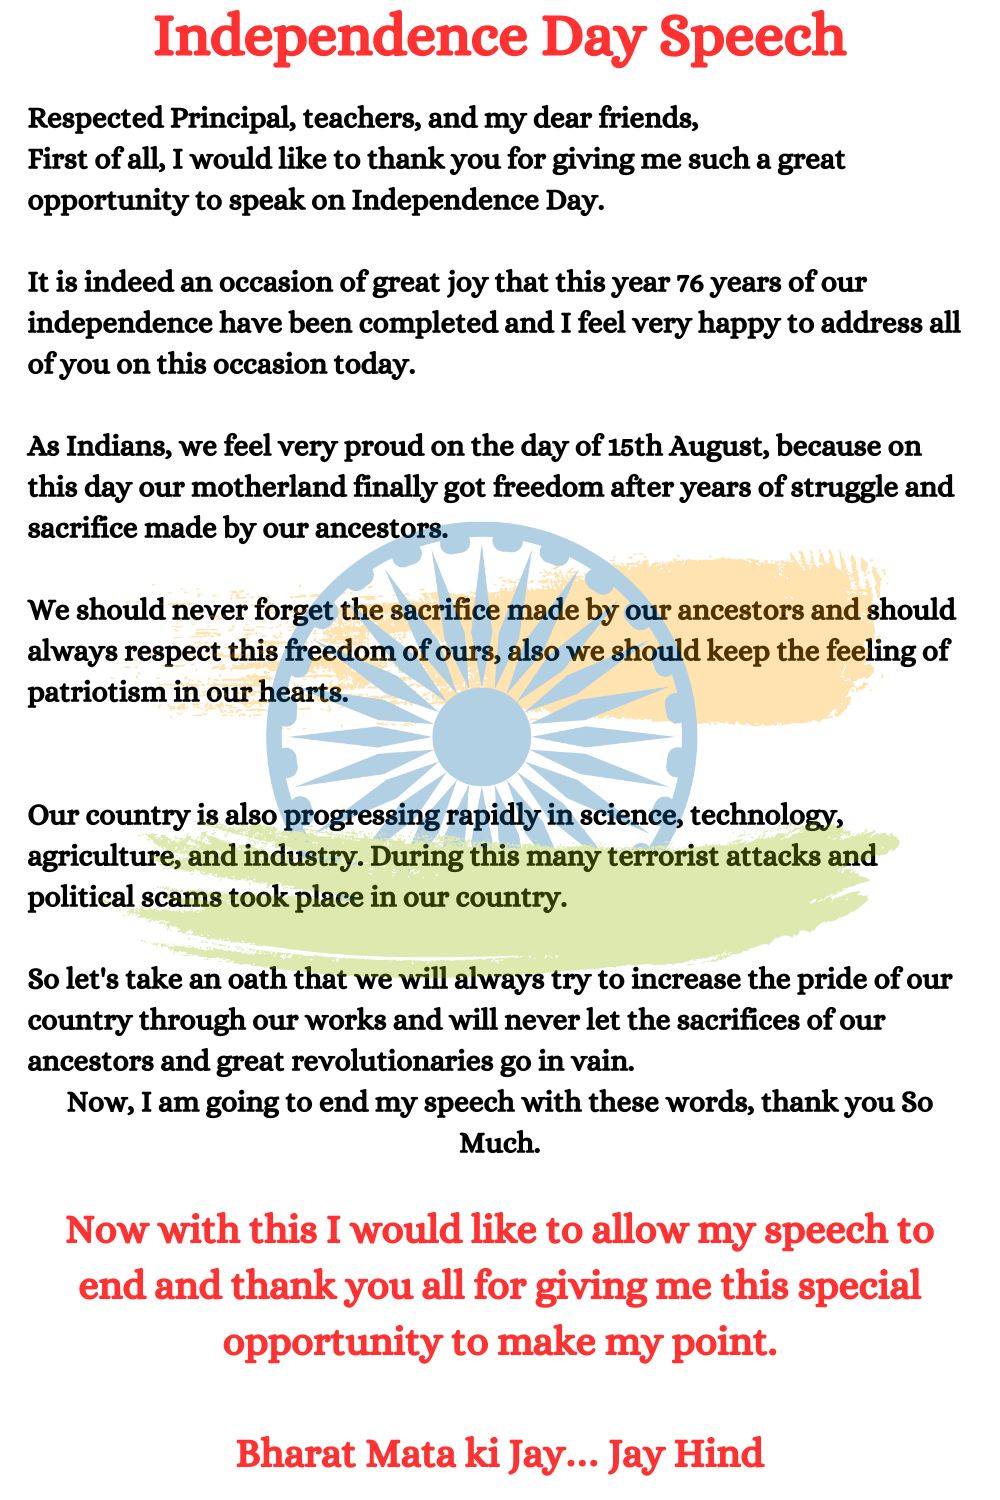 Independence day speech